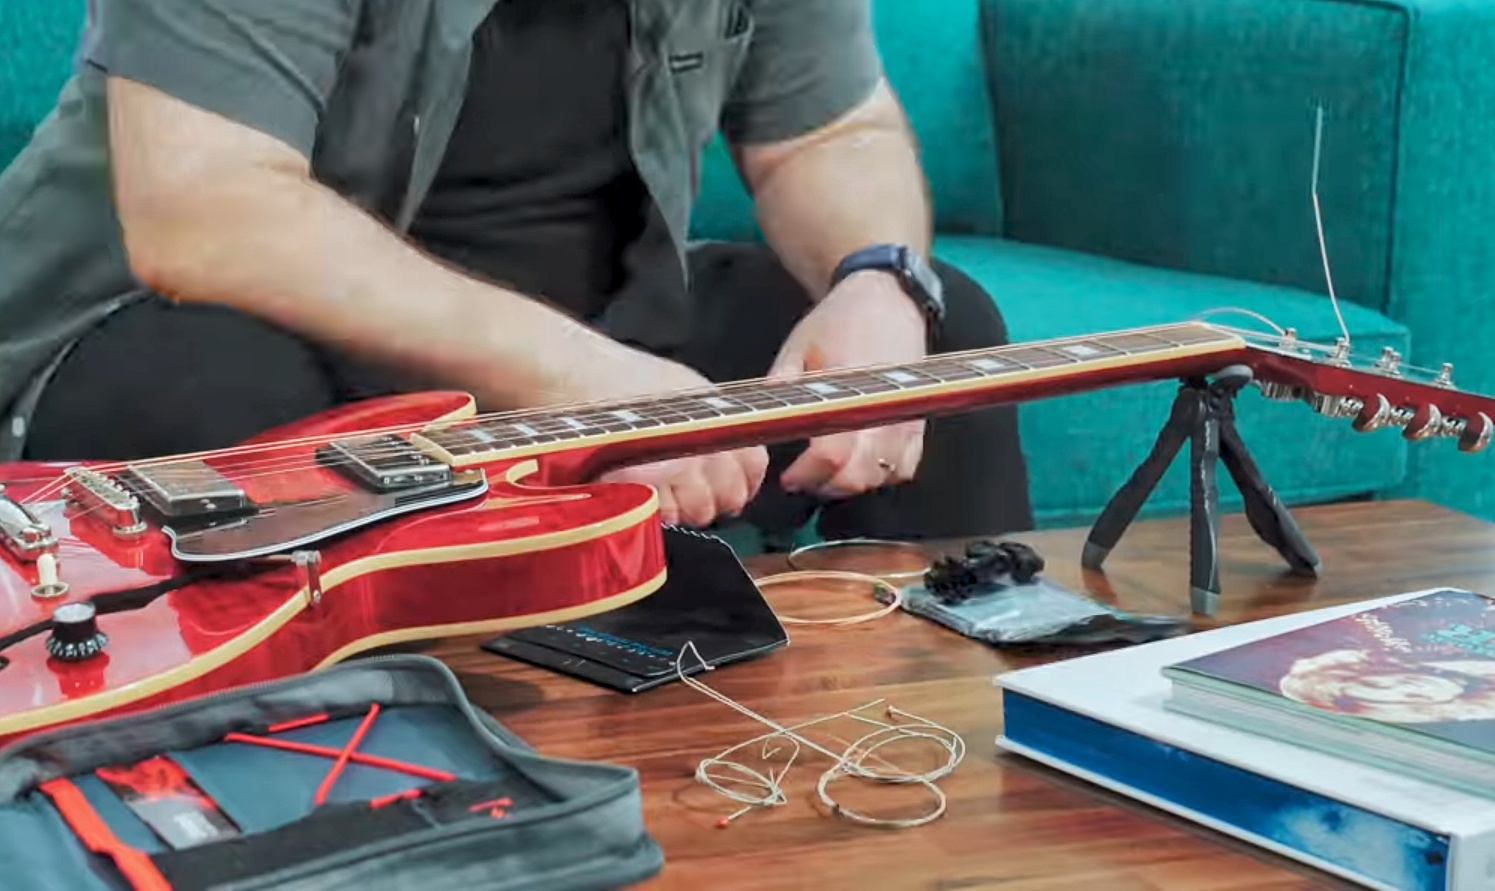 What happens when you put acoustic strings on an electric guitar